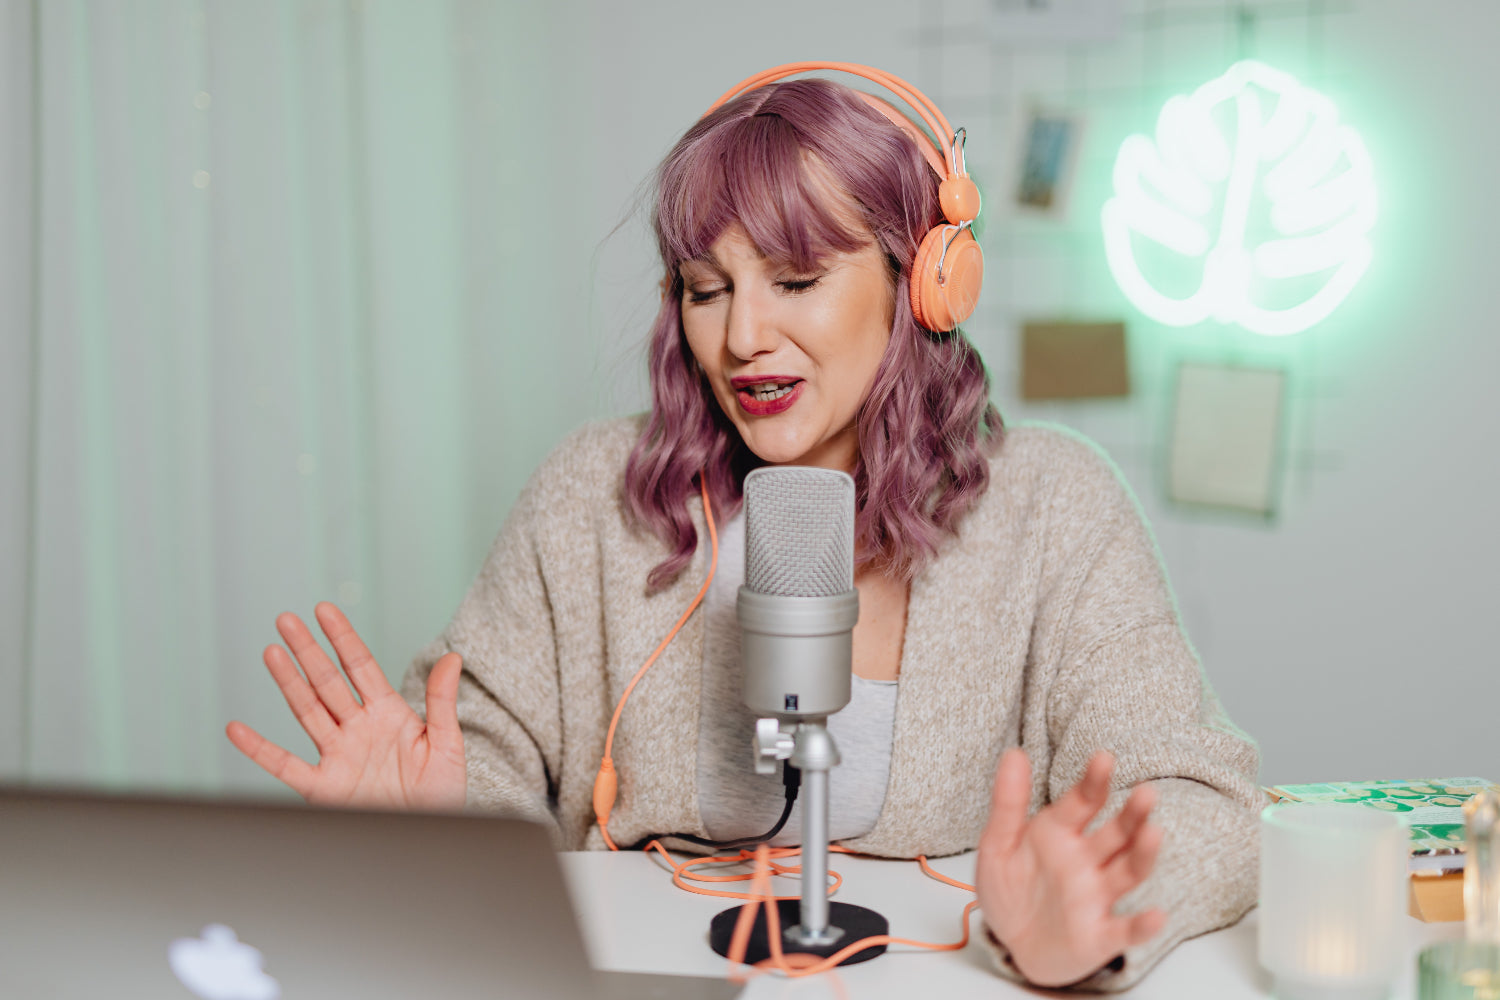 A woman speaks into a podcasting mic, showing one way to make money online